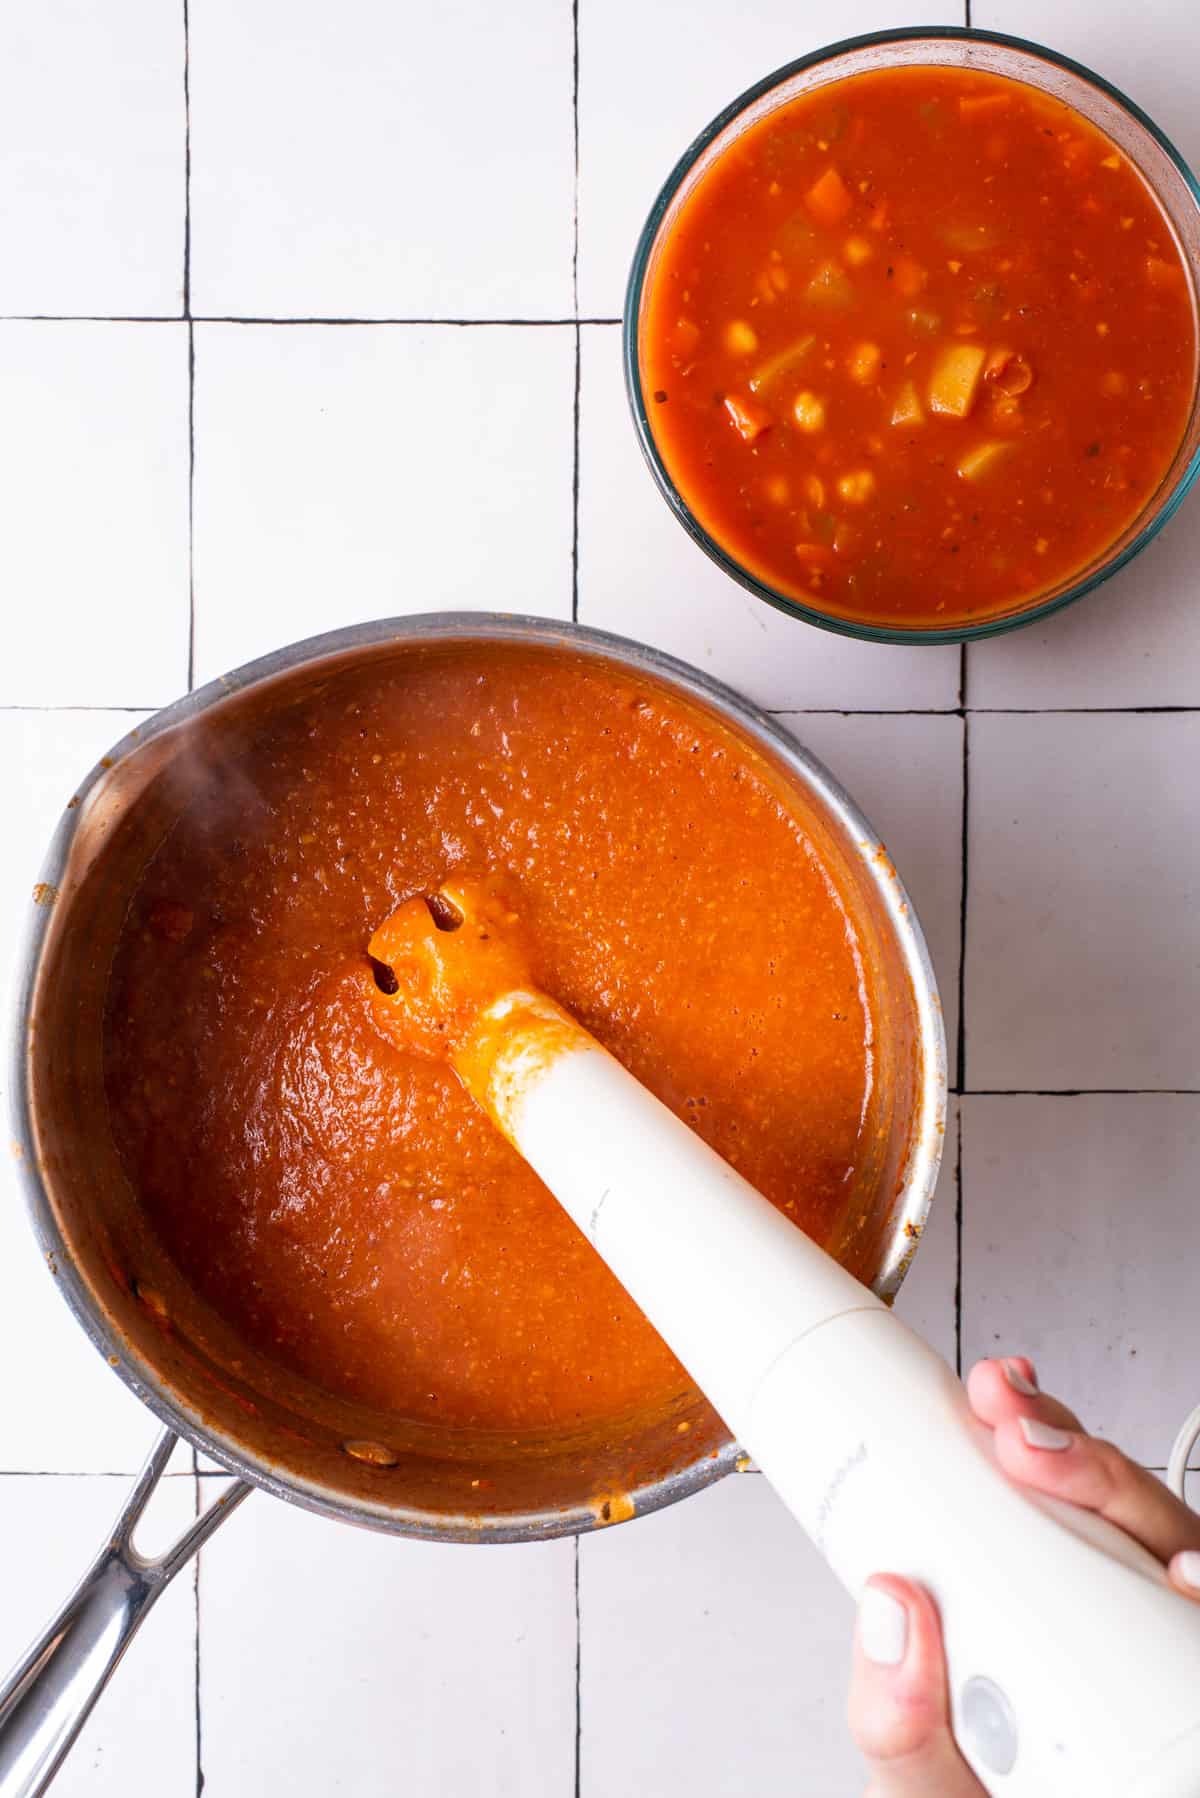 Blending tomato chickpea soup with an immersion blender.